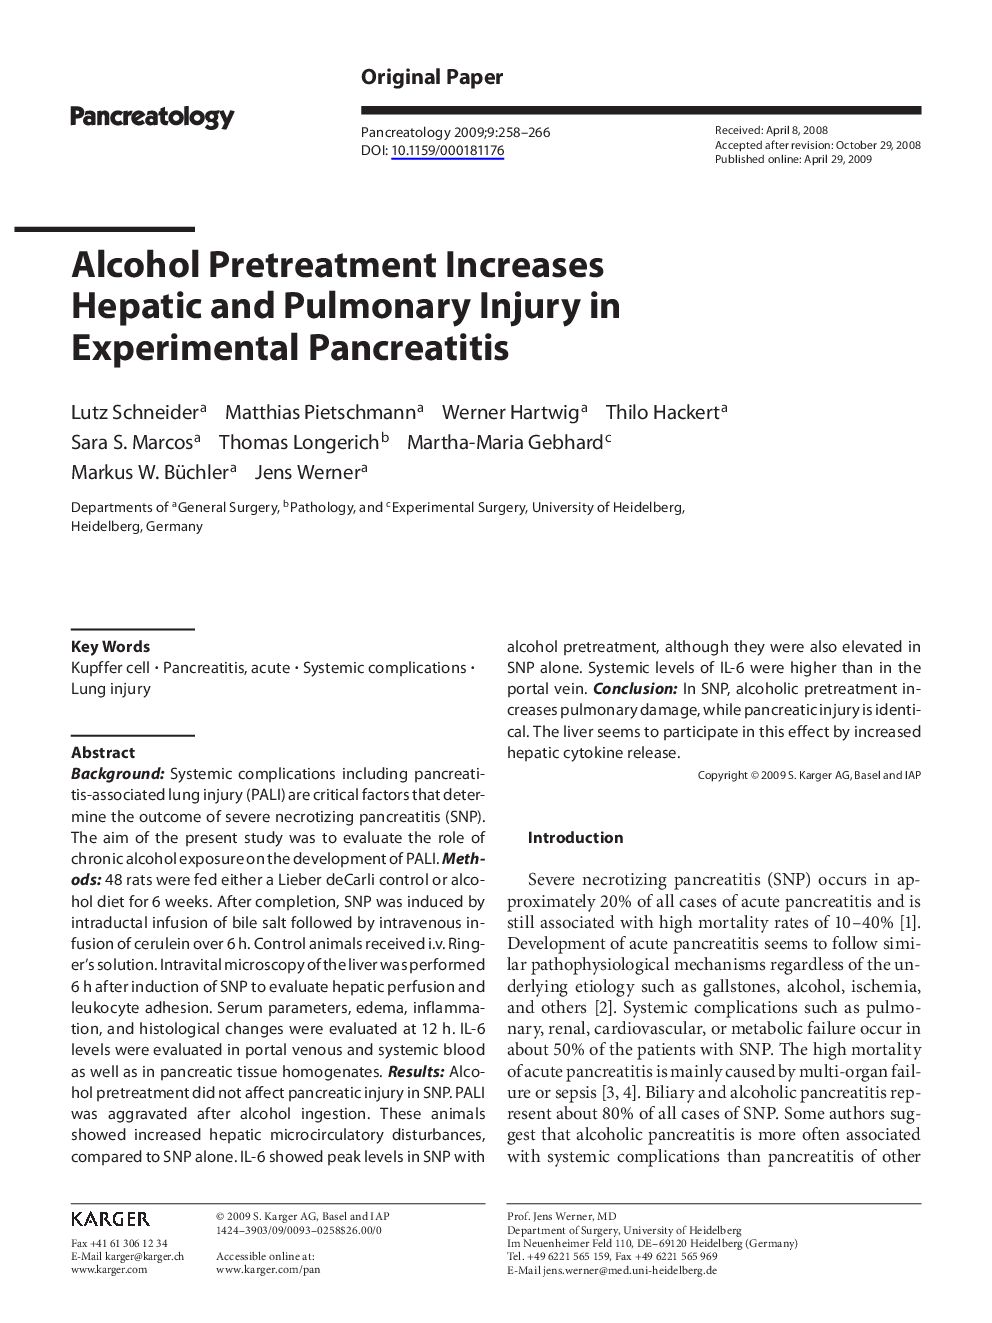 Alcohol Pretreatment Increases Hepatic and Pulmonary Injury in Experimental Pancreatitis